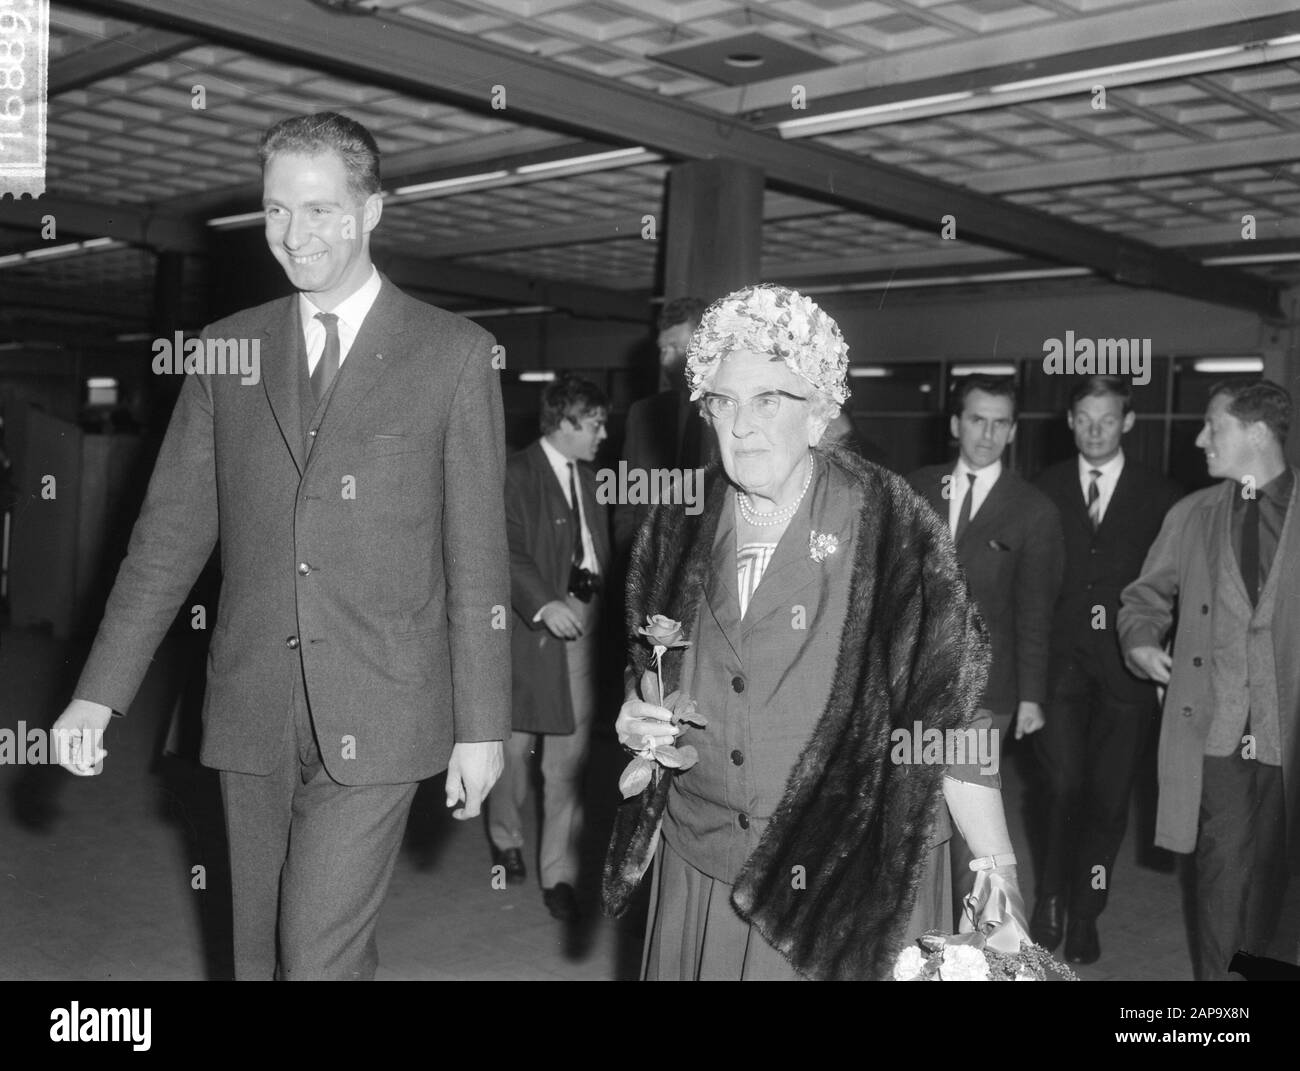 Agatha Christie in the Netherlands (detective writer), upon arrival at Schiphol Airport with rose in her hand Date: September 17, 1964 Location: Noord-Holland, Schiphol Keywords: arrivals Personal name : Agatha Christie Stock Photo